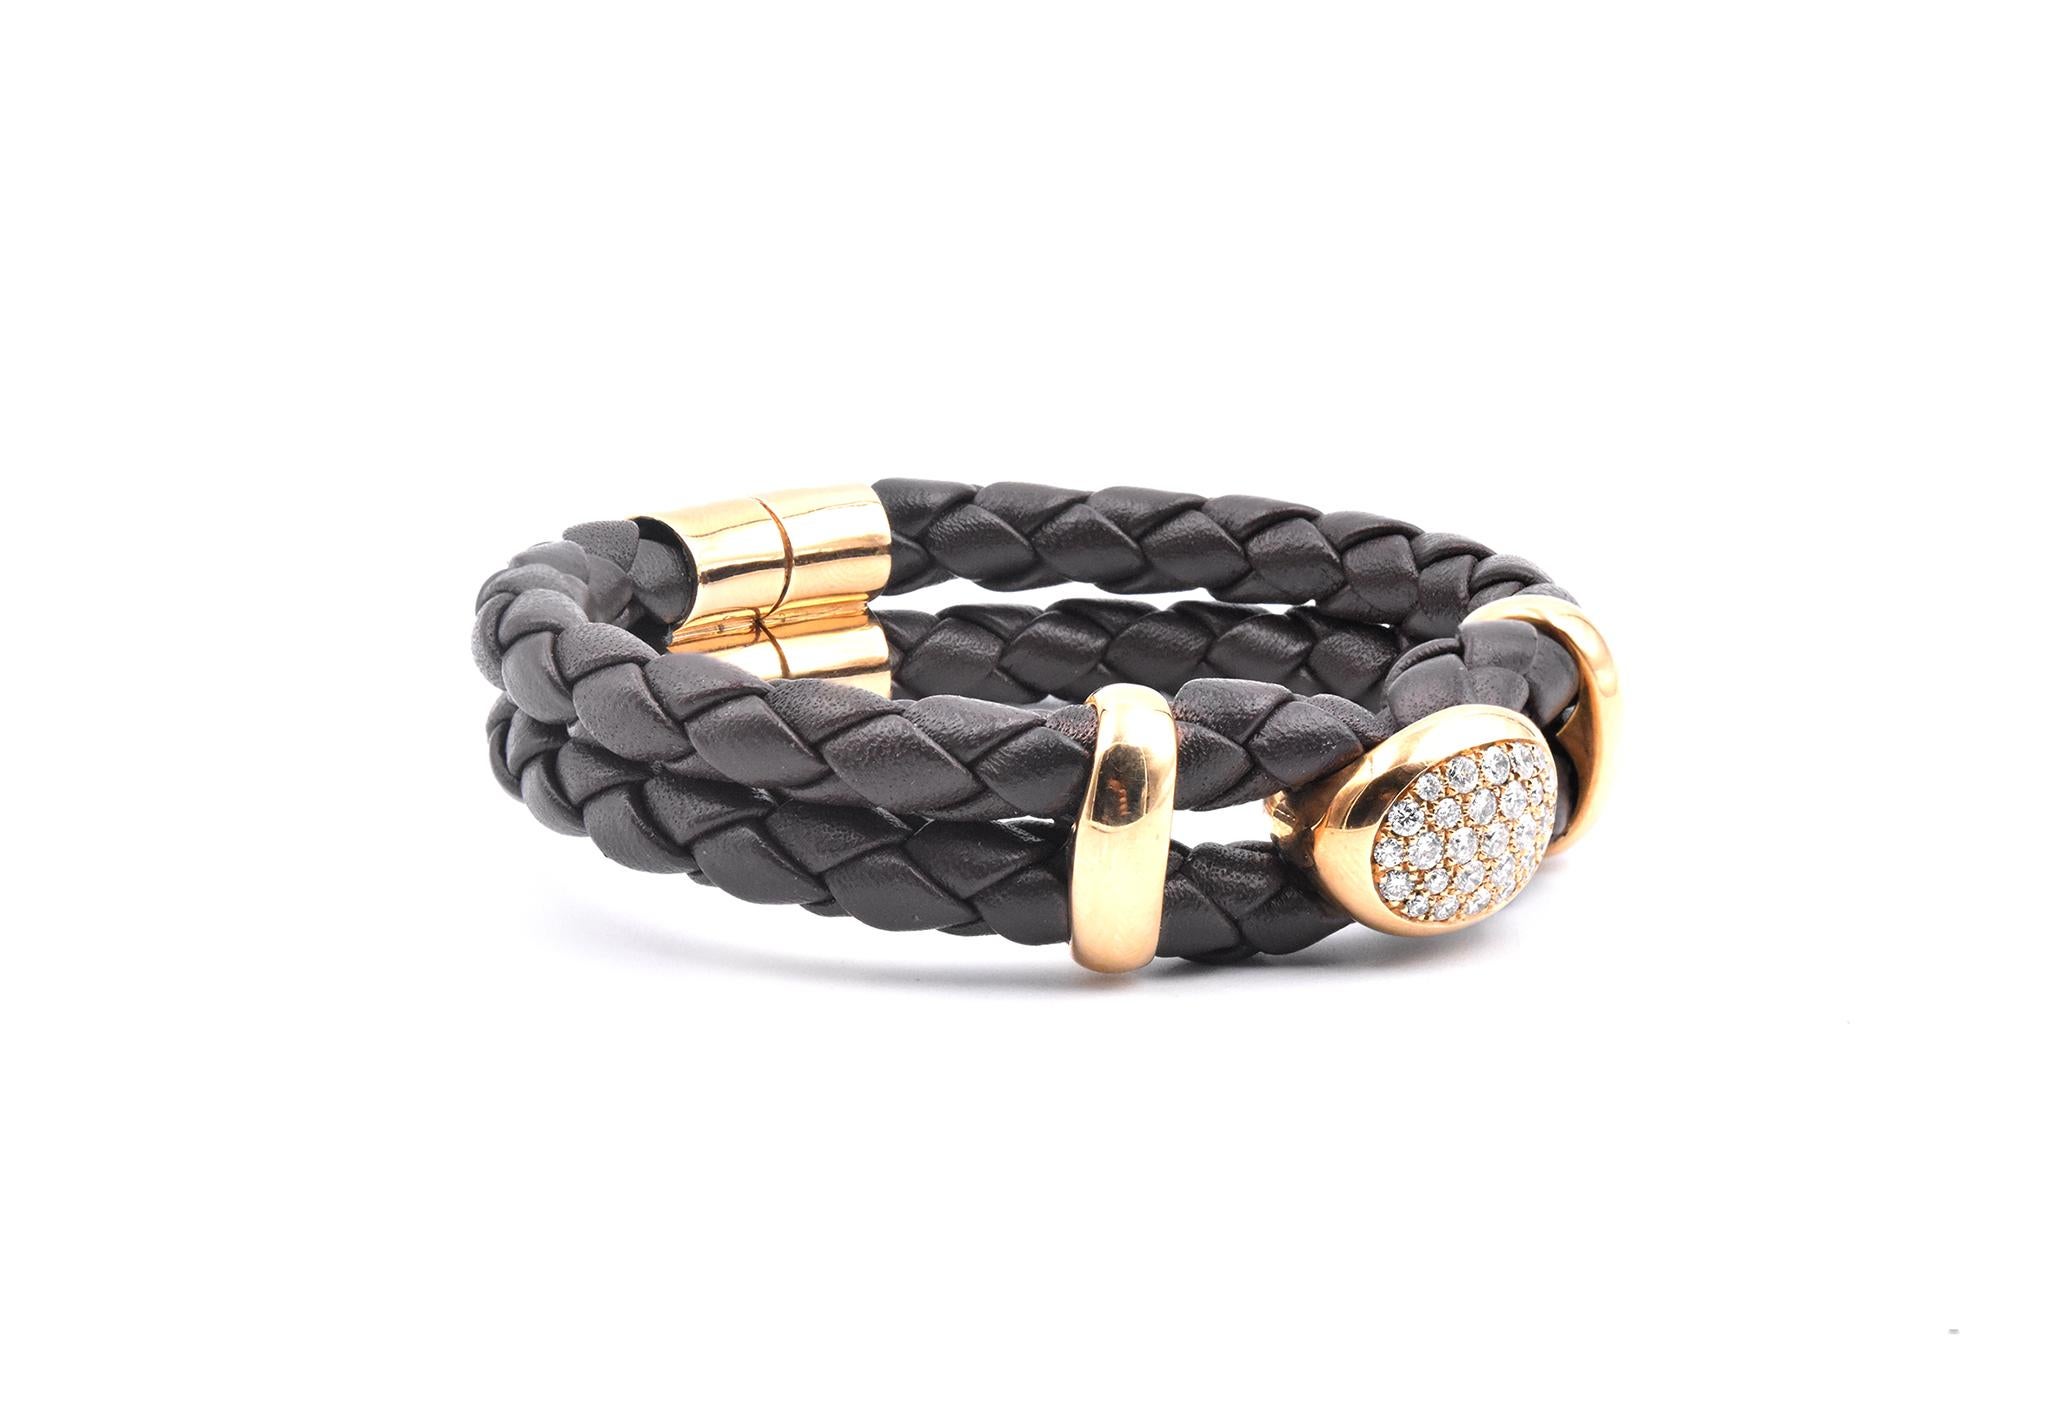 Material: 18K yellow gold / leather
Diamonds:  30 round cut = .90cttw
Color: G
Clarity: VS
Dimensions: bracelet will fit up to a 6.5-inch wrist
Weight: 32.02 grams